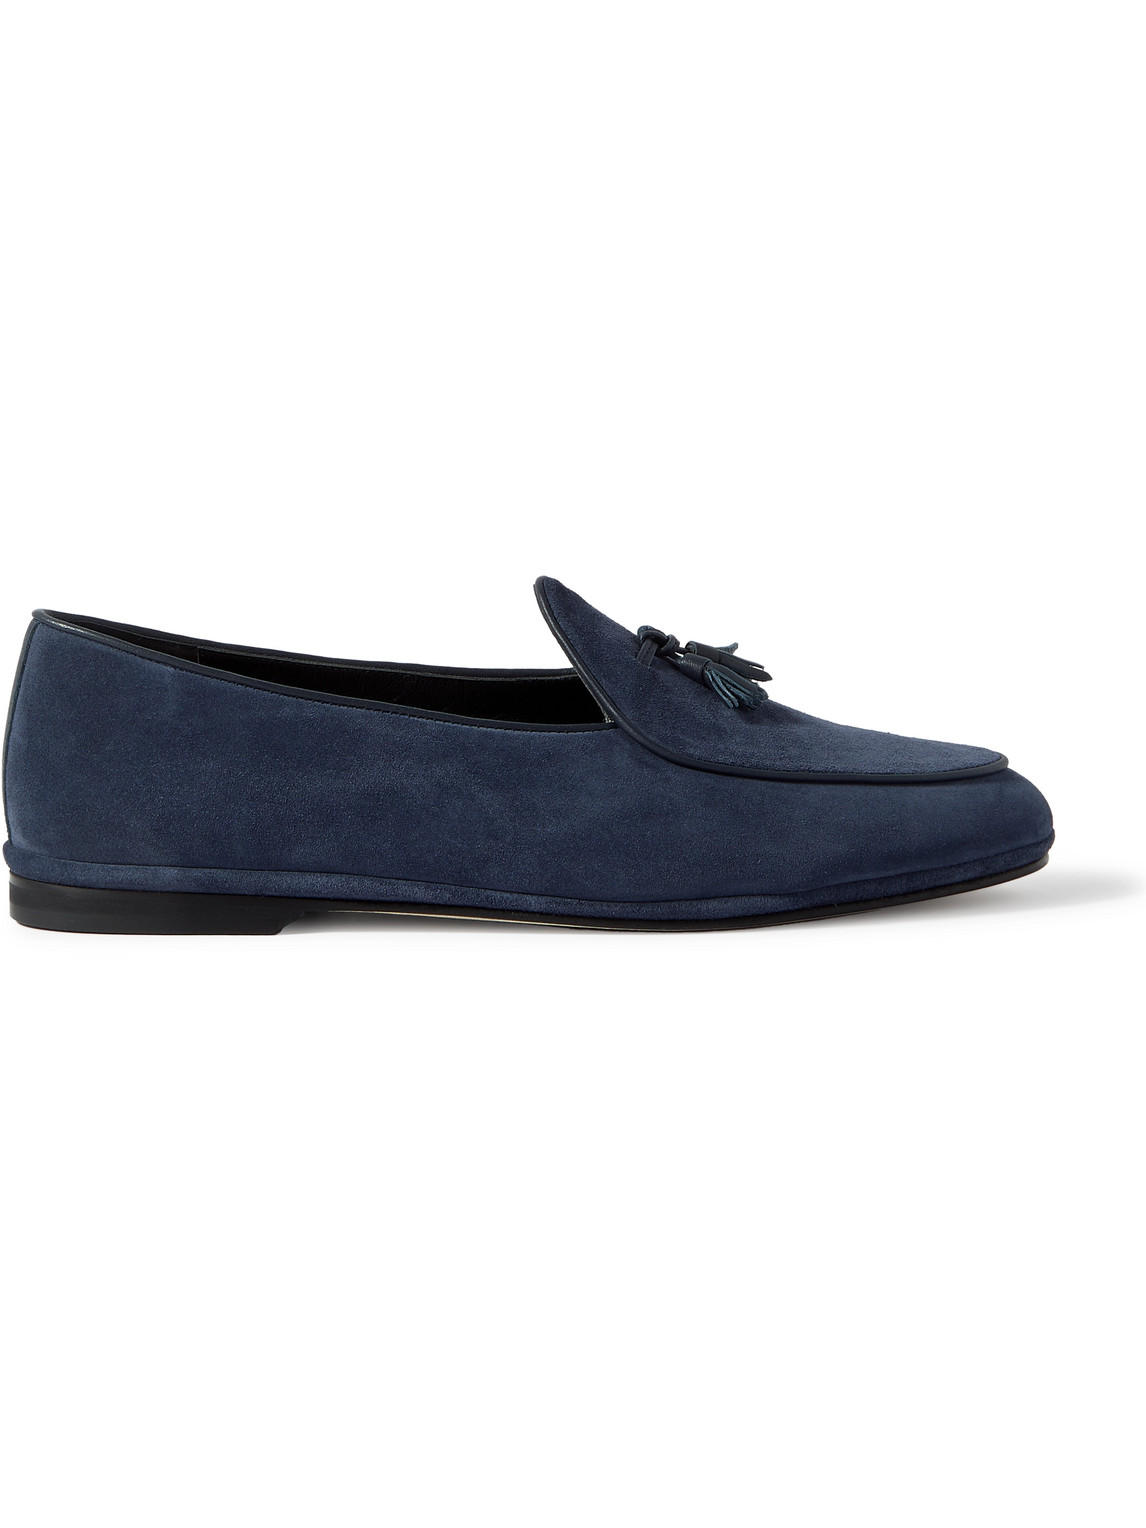 Tasselled Suede Loafers